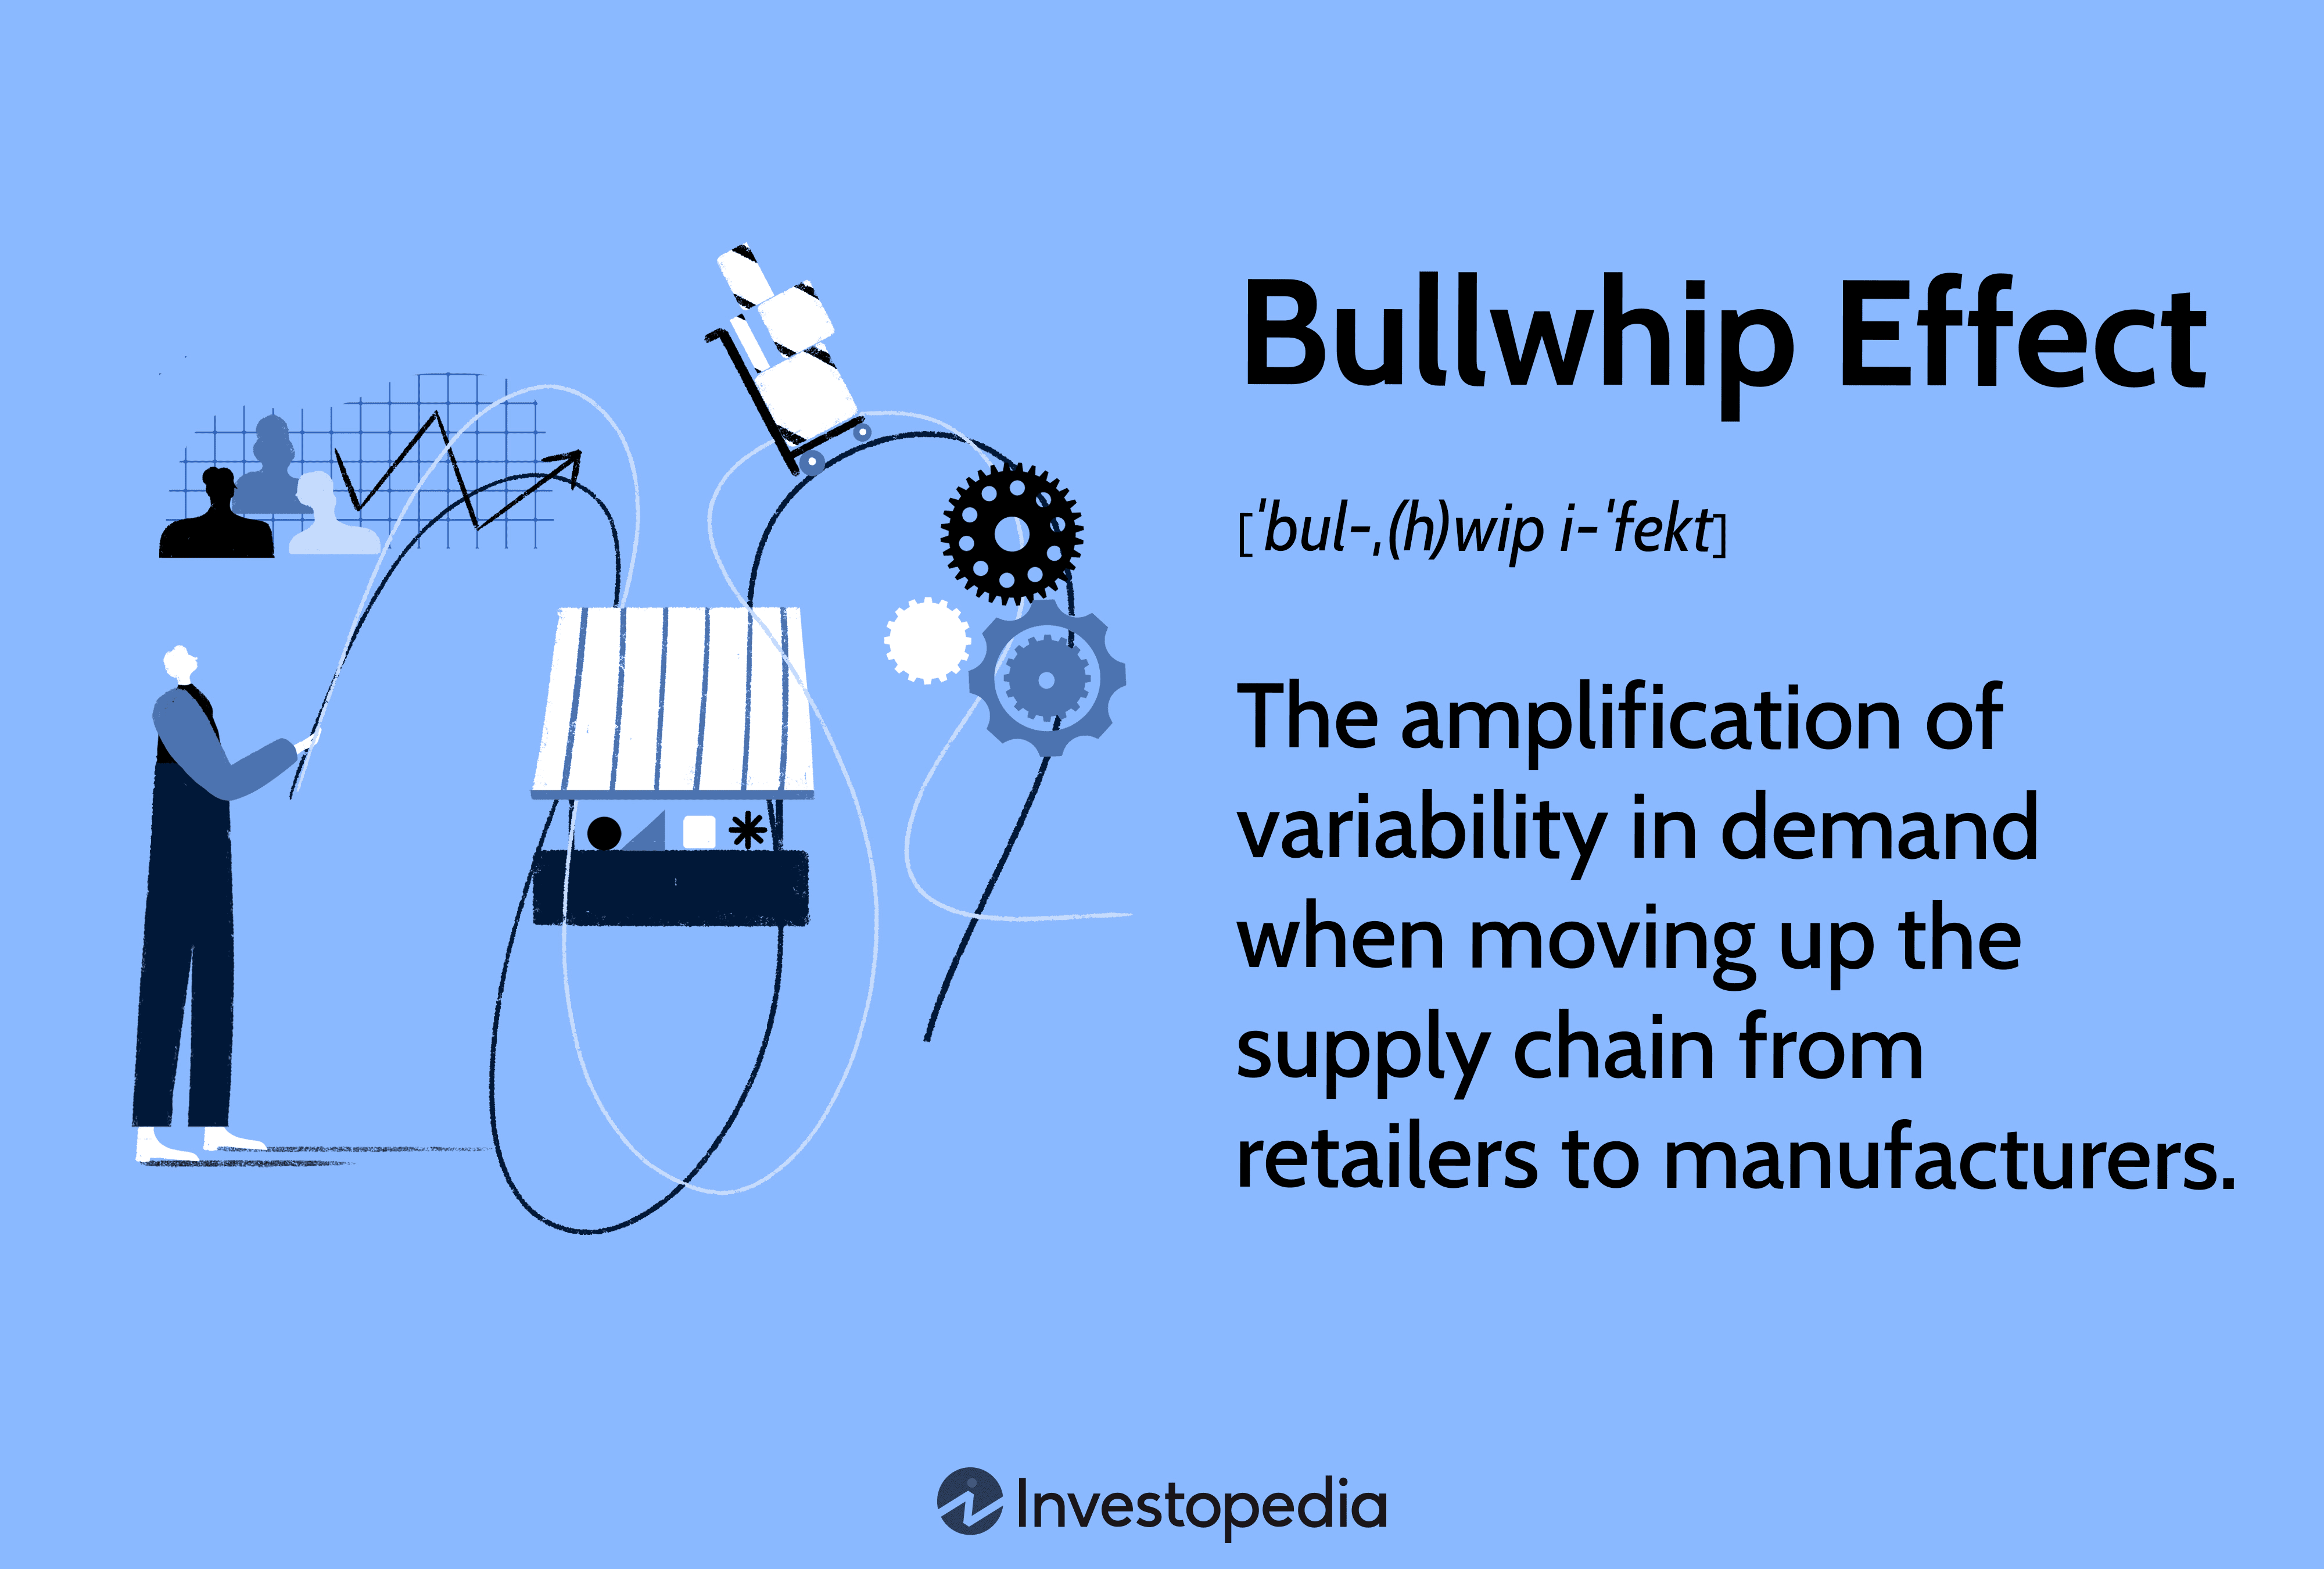 Bullwhip Effect: The amplification of variability in demand when moving up the supply chain from retailers to manufacturers.